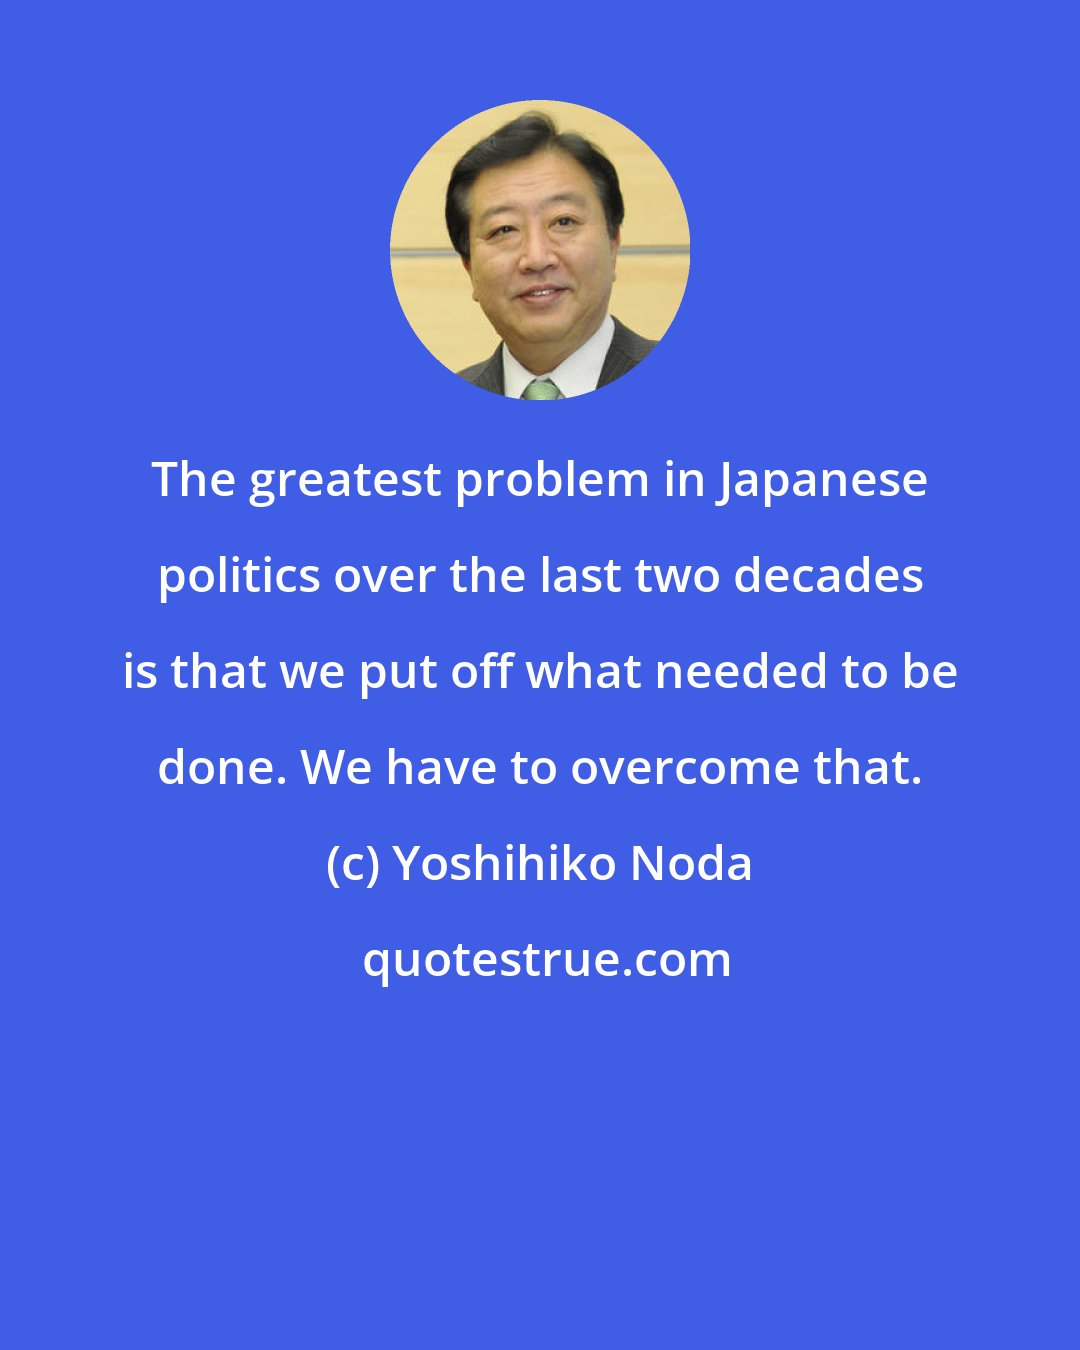 Yoshihiko Noda: The greatest problem in Japanese politics over the last two decades is that we put off what needed to be done. We have to overcome that.